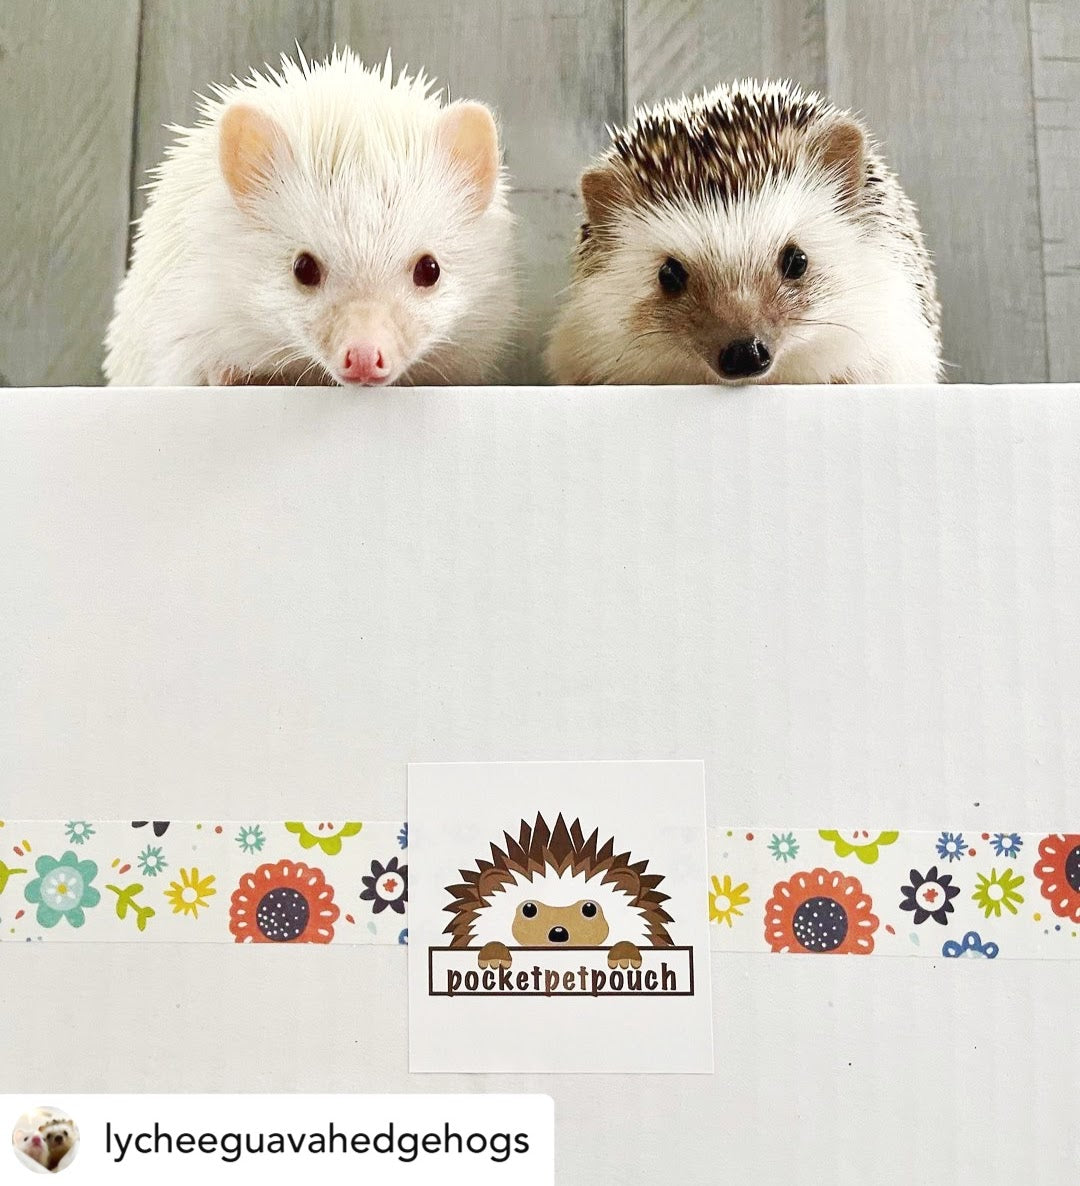 Two Pygmy Hedgehogs on top of a PocketPetPouch box